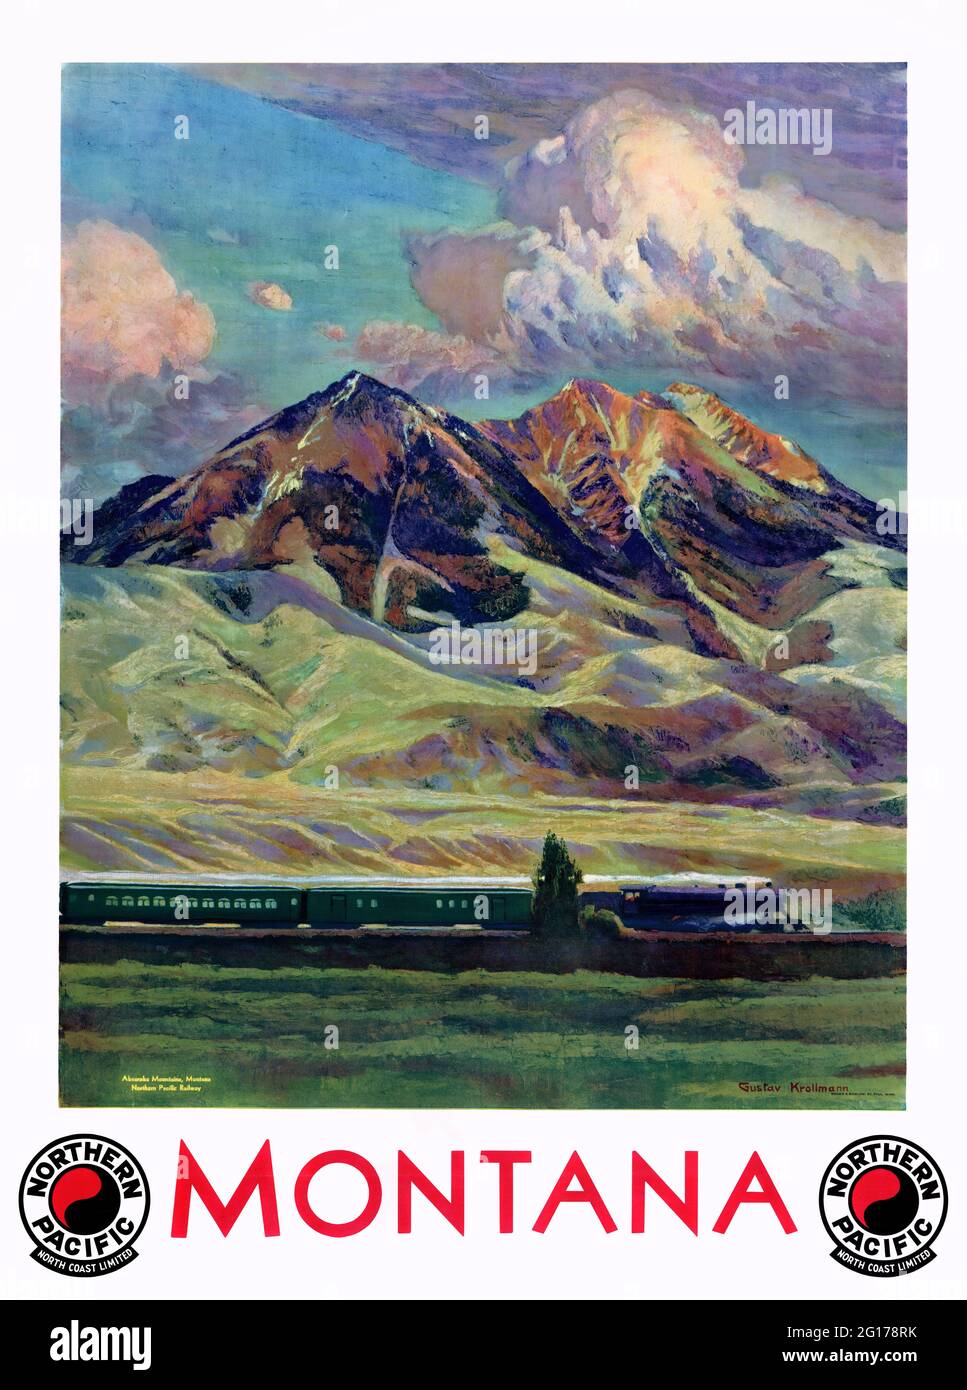 Montana. Northern Pacific by Gustav Wilhelm Krollmann (1888-1962). Restored vintage poster published 1920 in the USA. Stock Photo